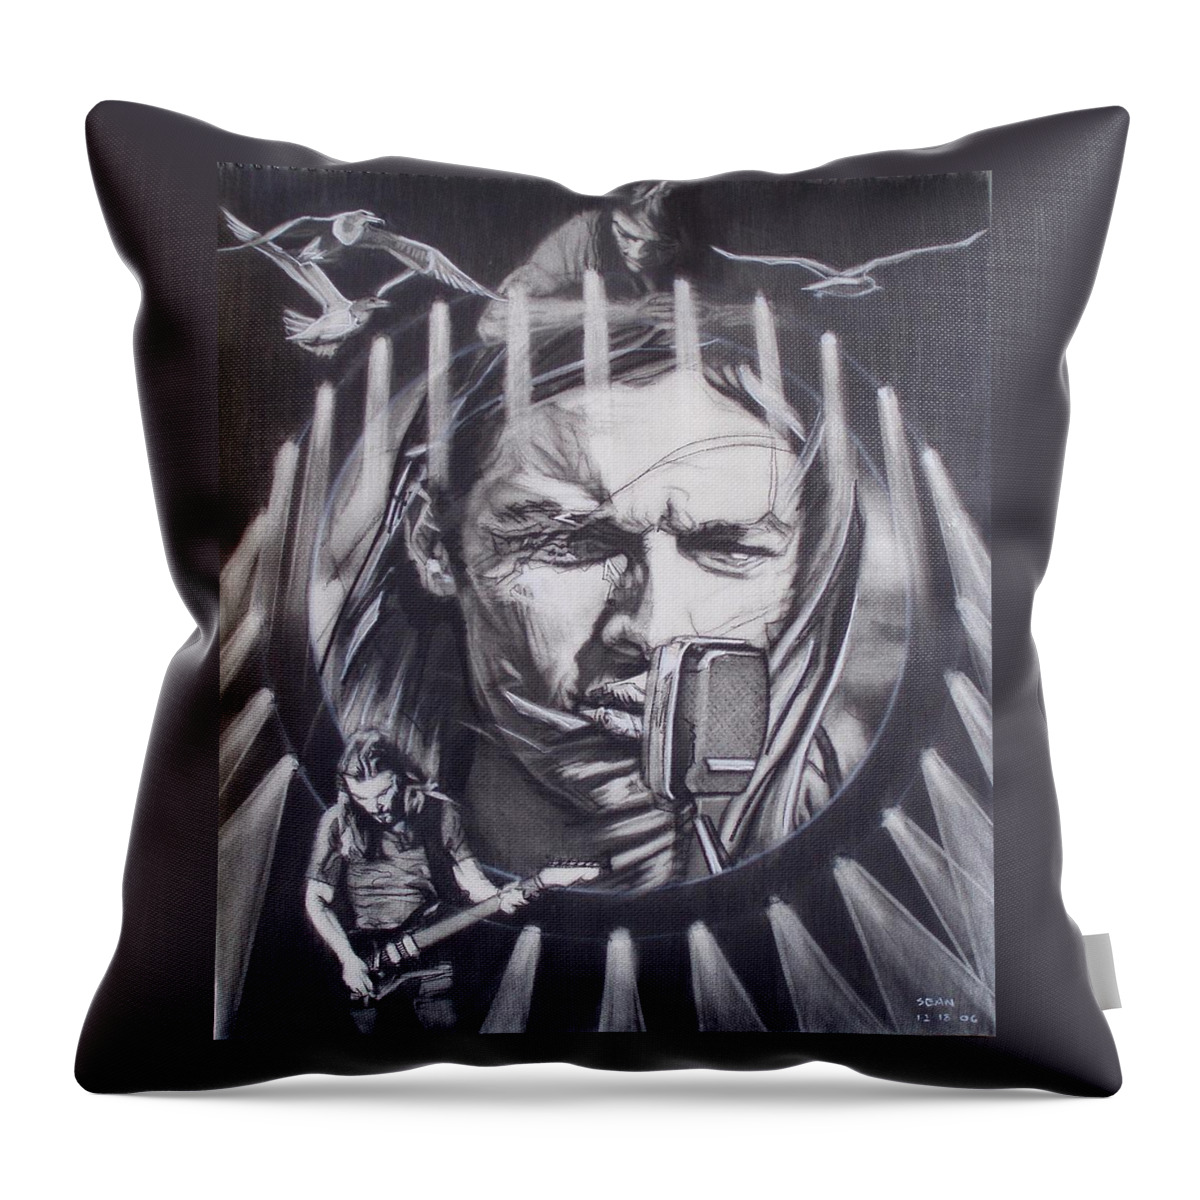 Charcoal Pencil On Paper Throw Pillow featuring the drawing David Gilmour Of Pink Floyd - Echoes by Sean Connolly